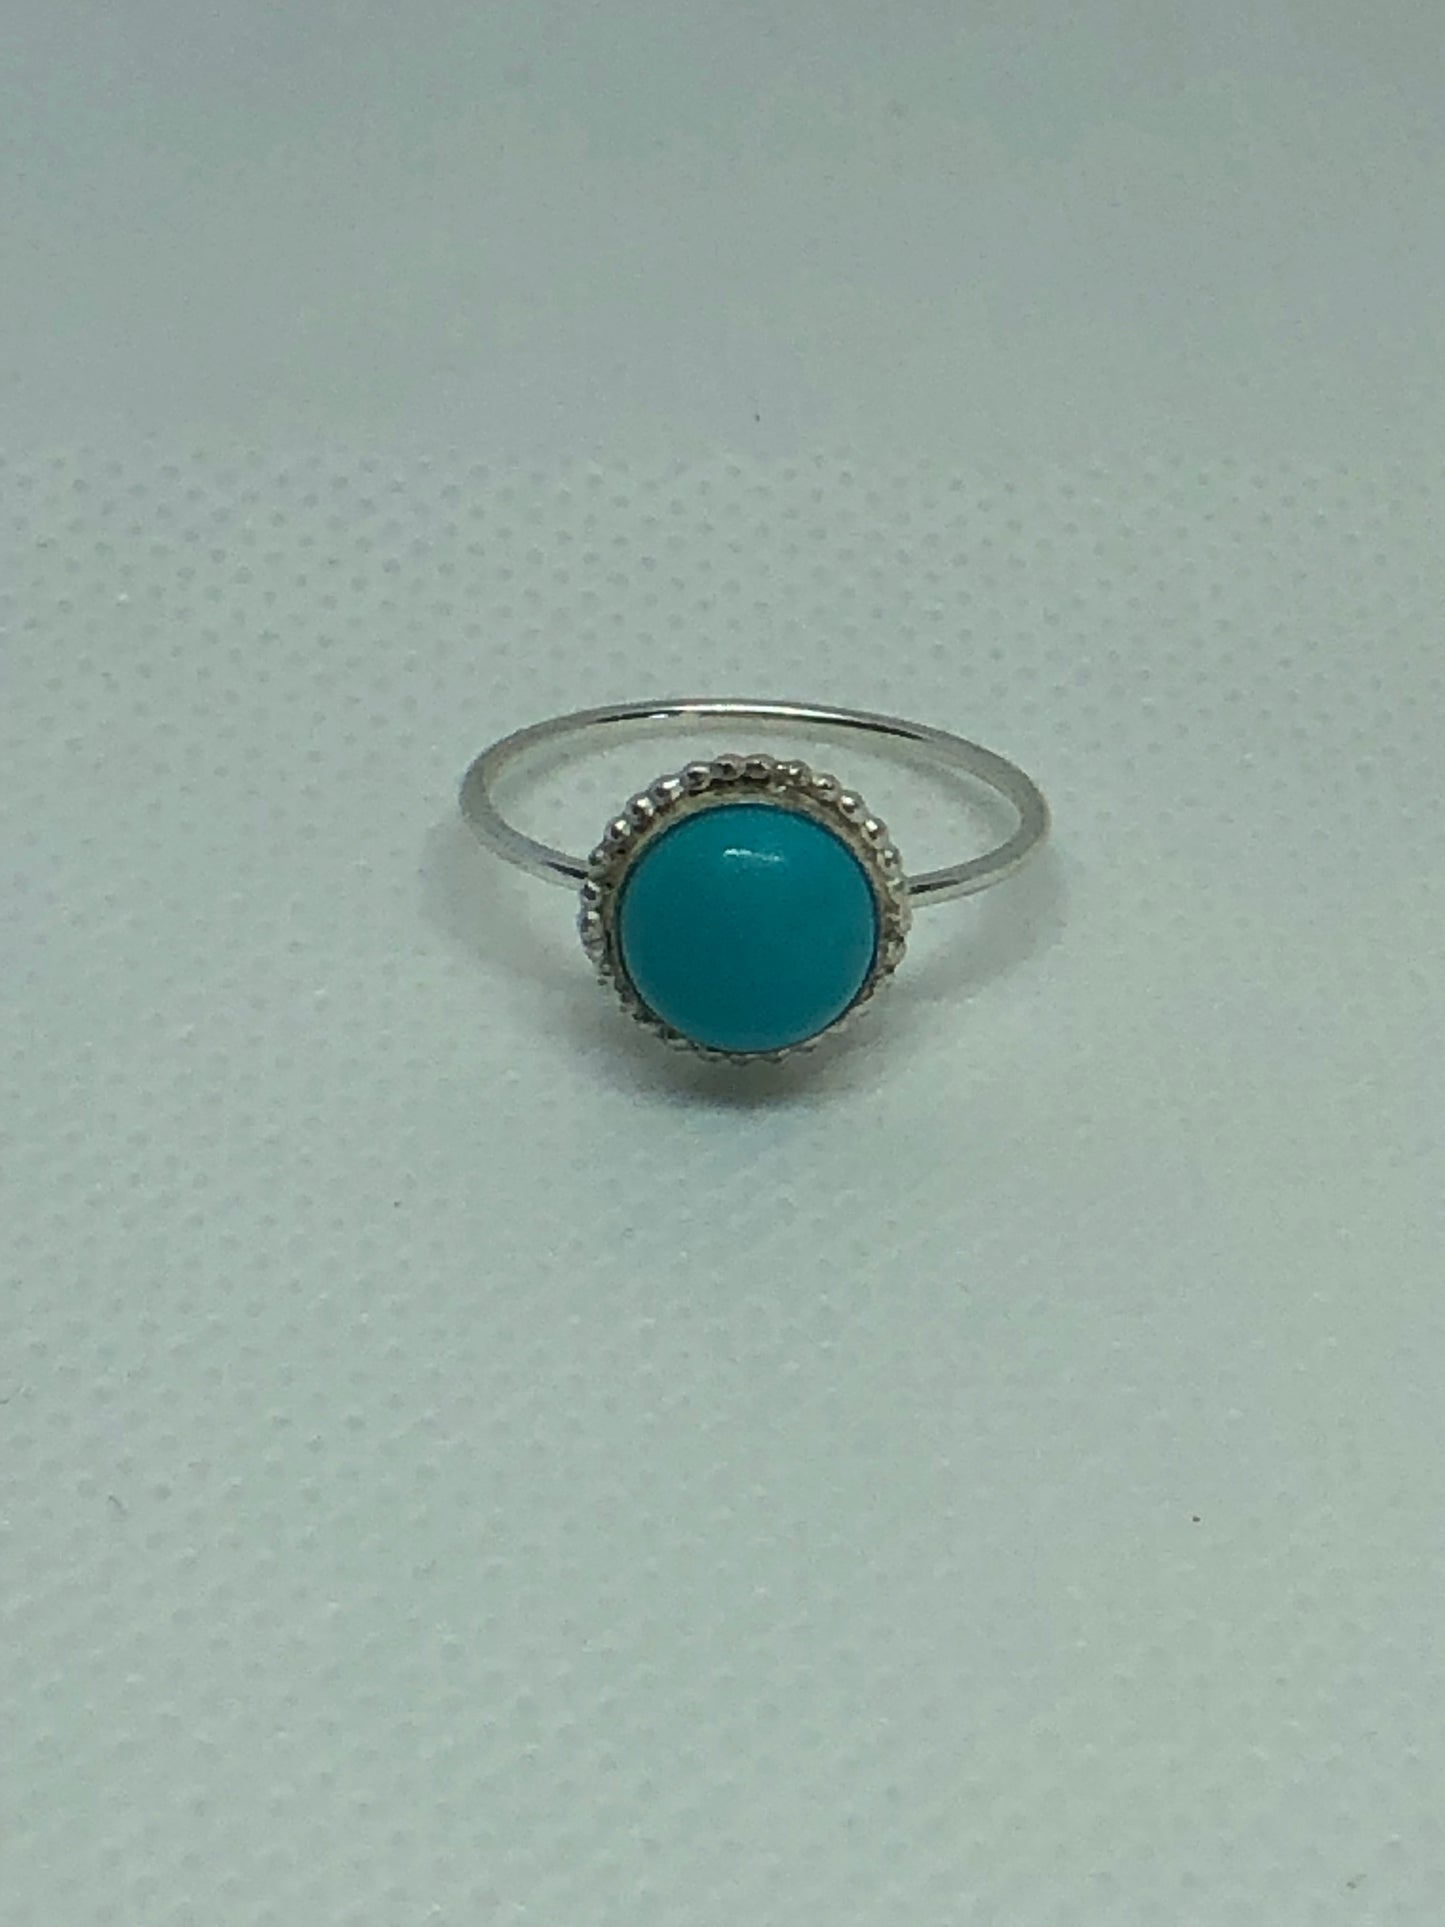 7 & 8 US 8mm Turquoise Sterling Silver Ring